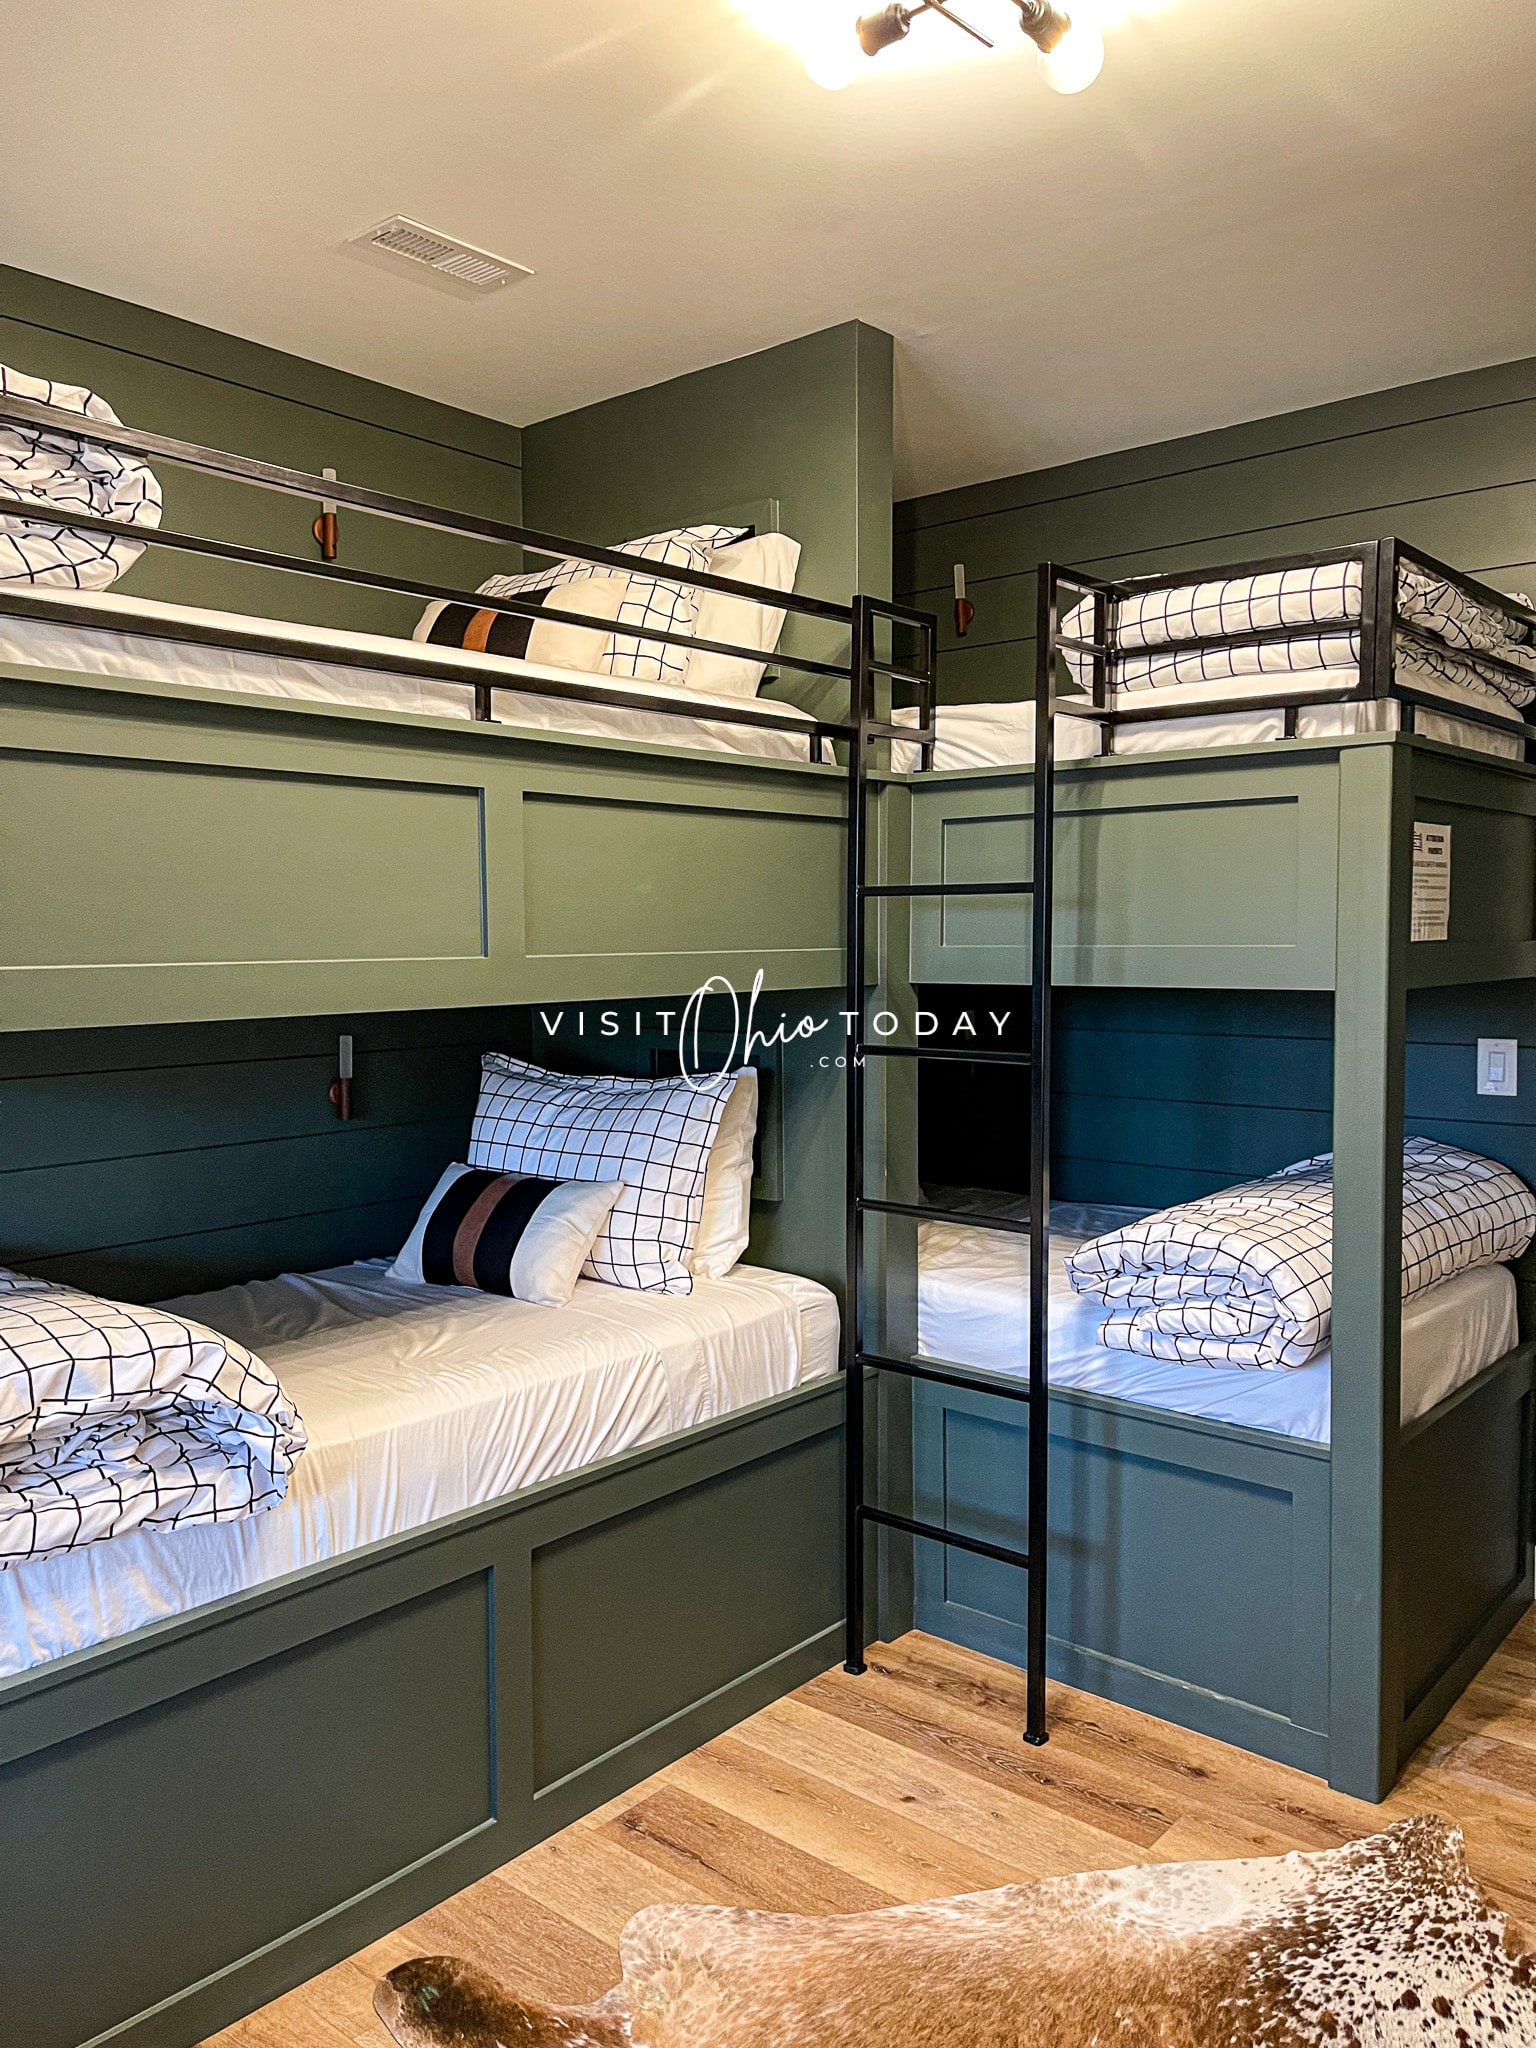 2 sets of green wooden bunk bed with rod iron ladders Photo credit: Cindy Gordon of VisitOhioToday.com